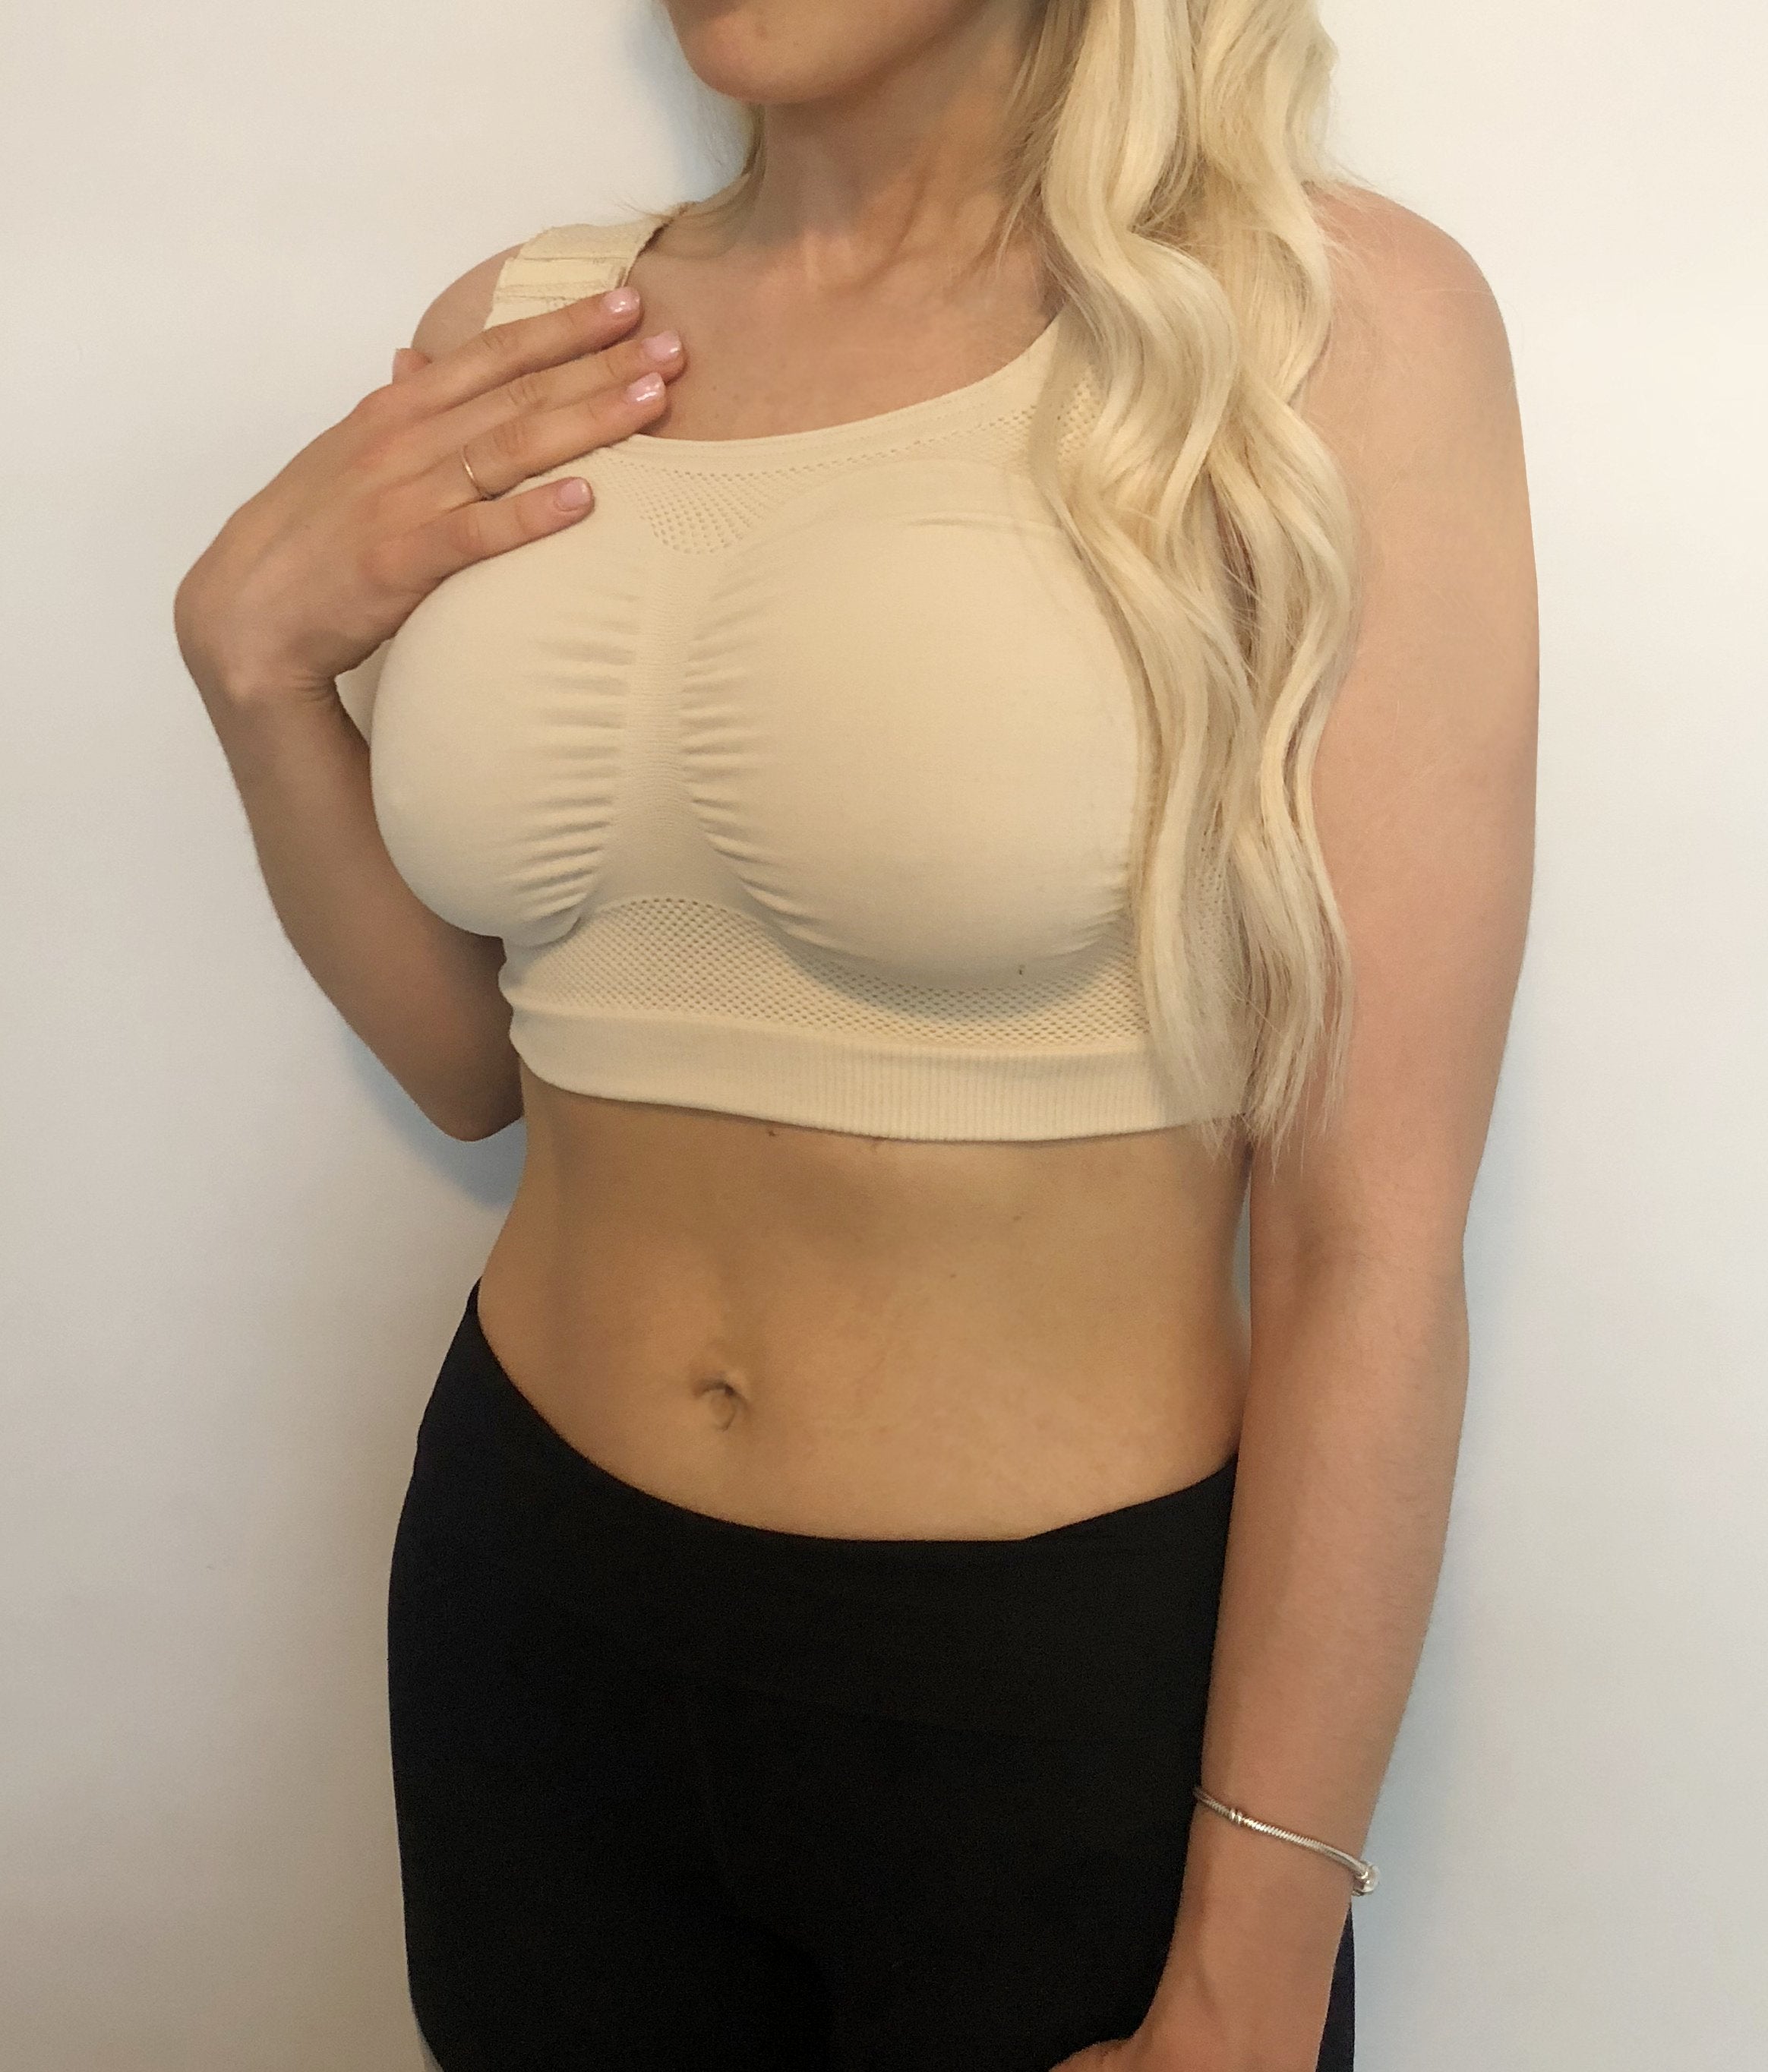 Caromed Post Surgical Bras and Arm Compression Garments